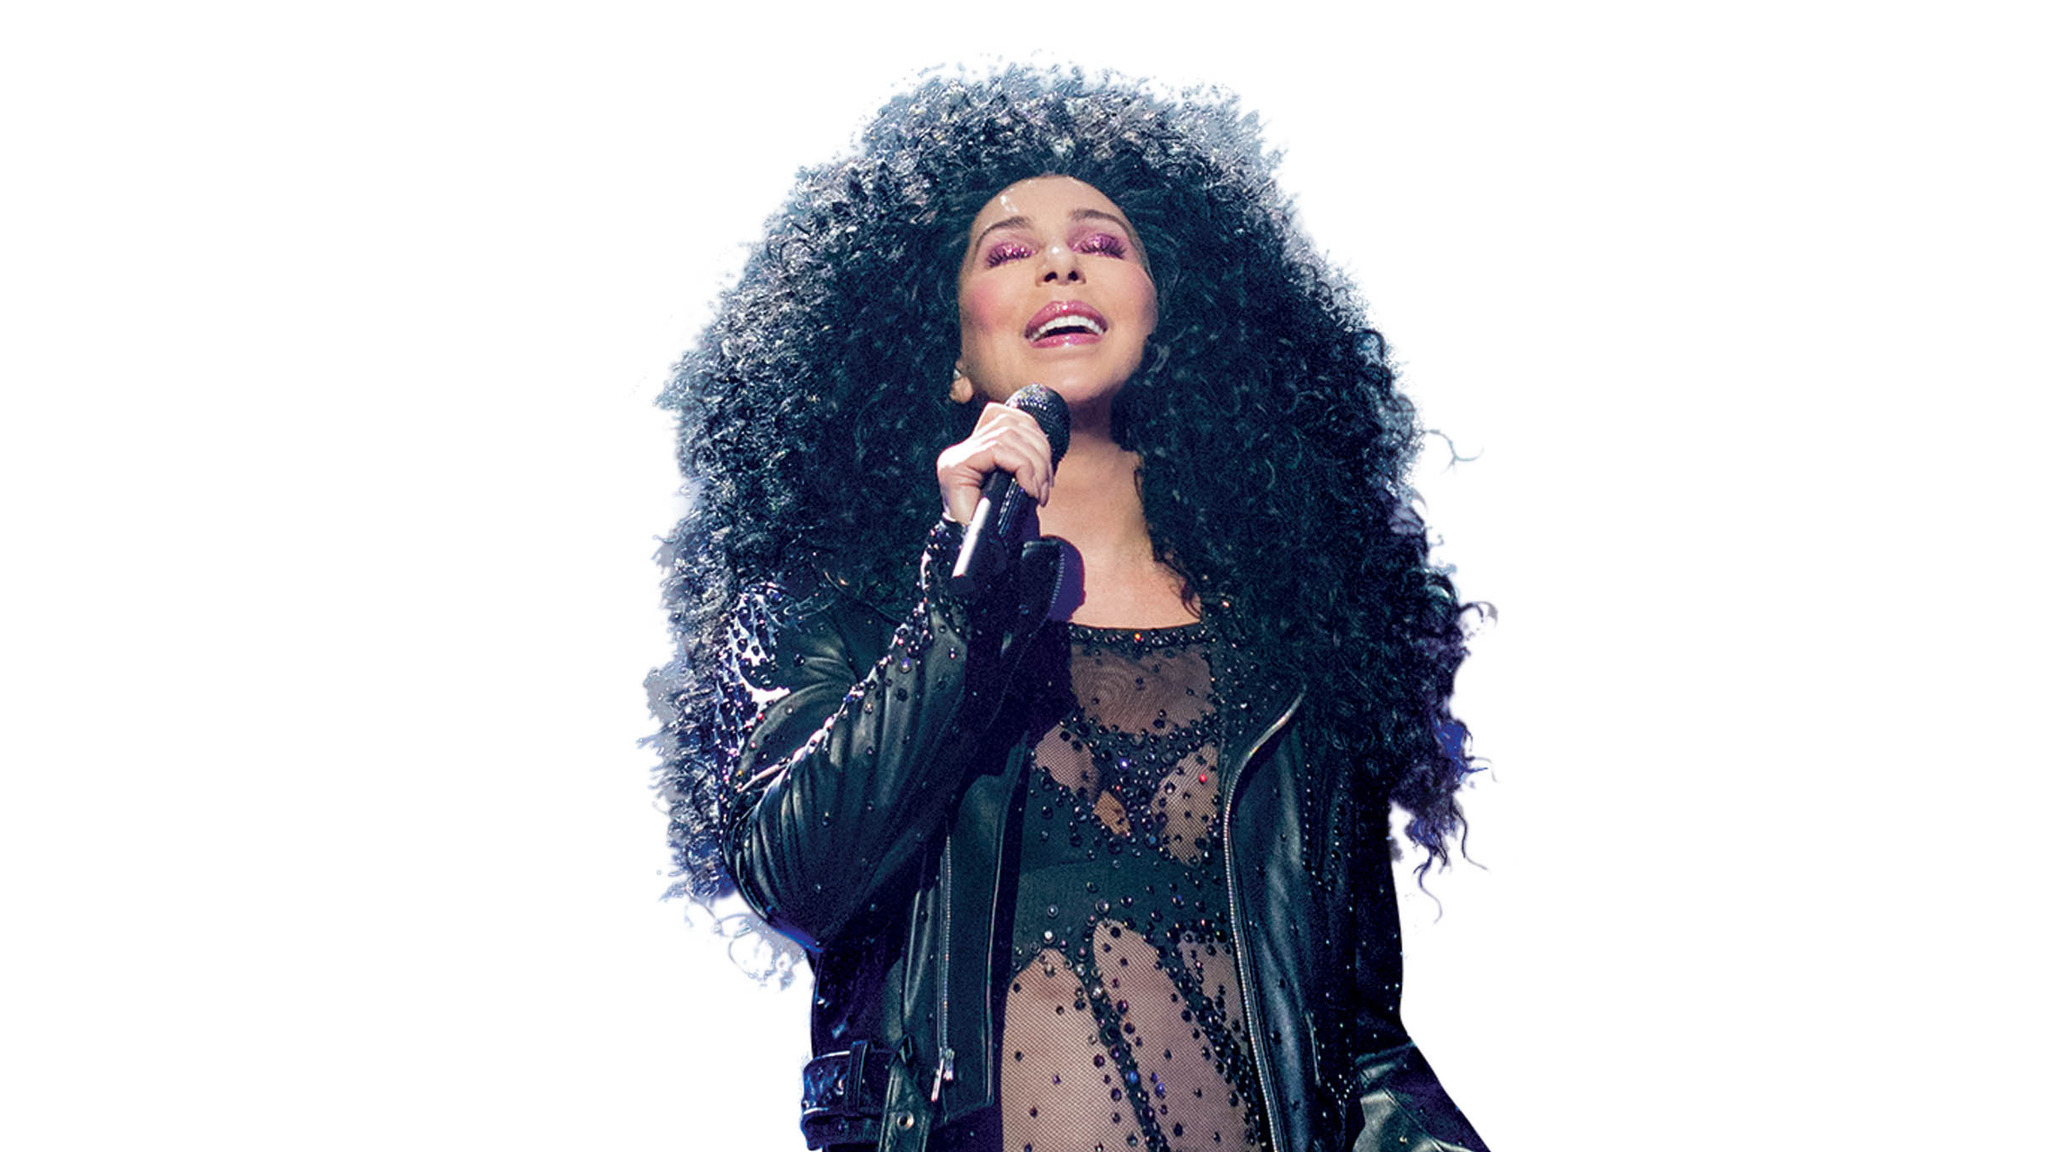 Cher at Dolby Live at Park MGM on 31 Oct 2018 Ticket Presale Code